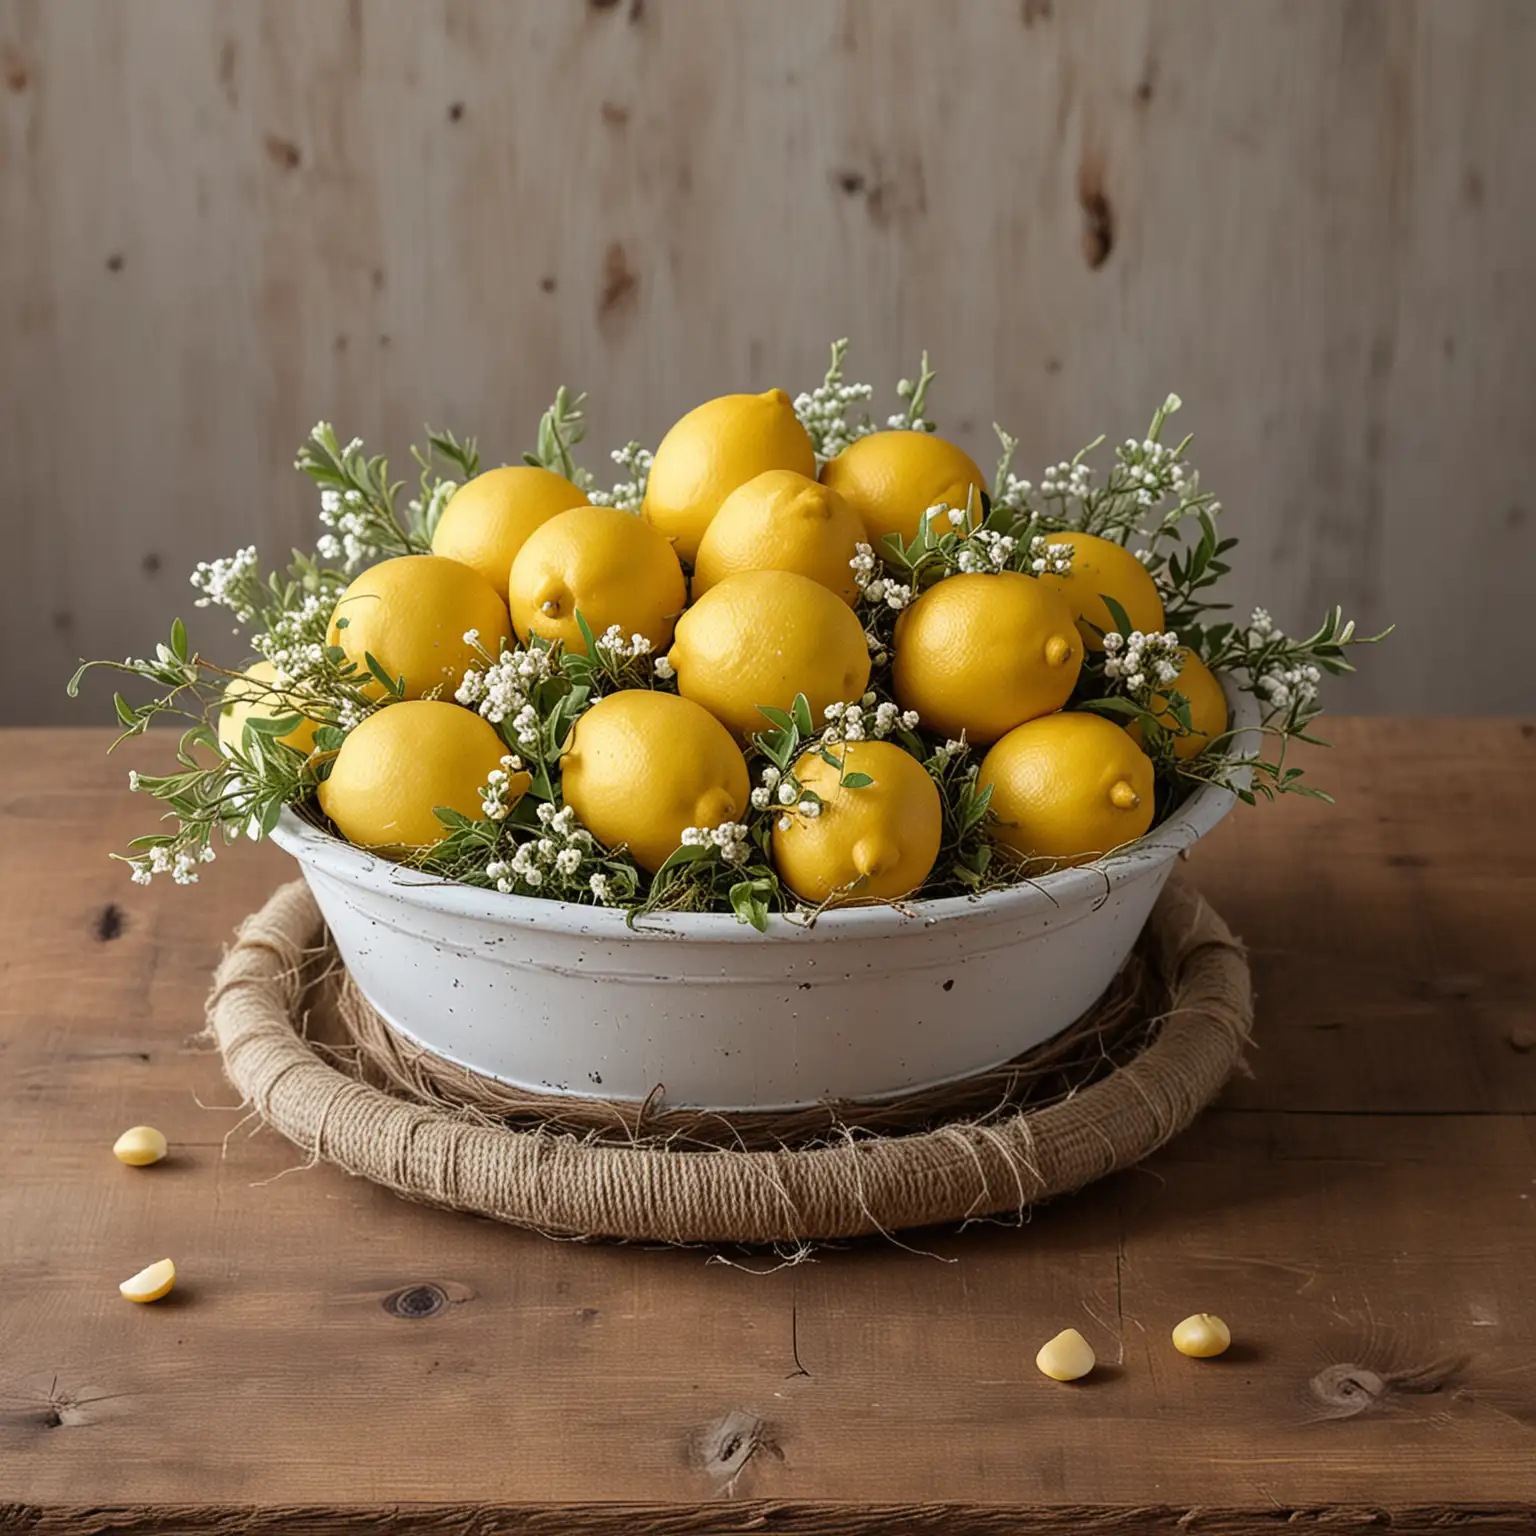 realistic image of a simple and small rustic wedding centerpiece using an old rustic white wash pan filled with lemons and embellished with twine